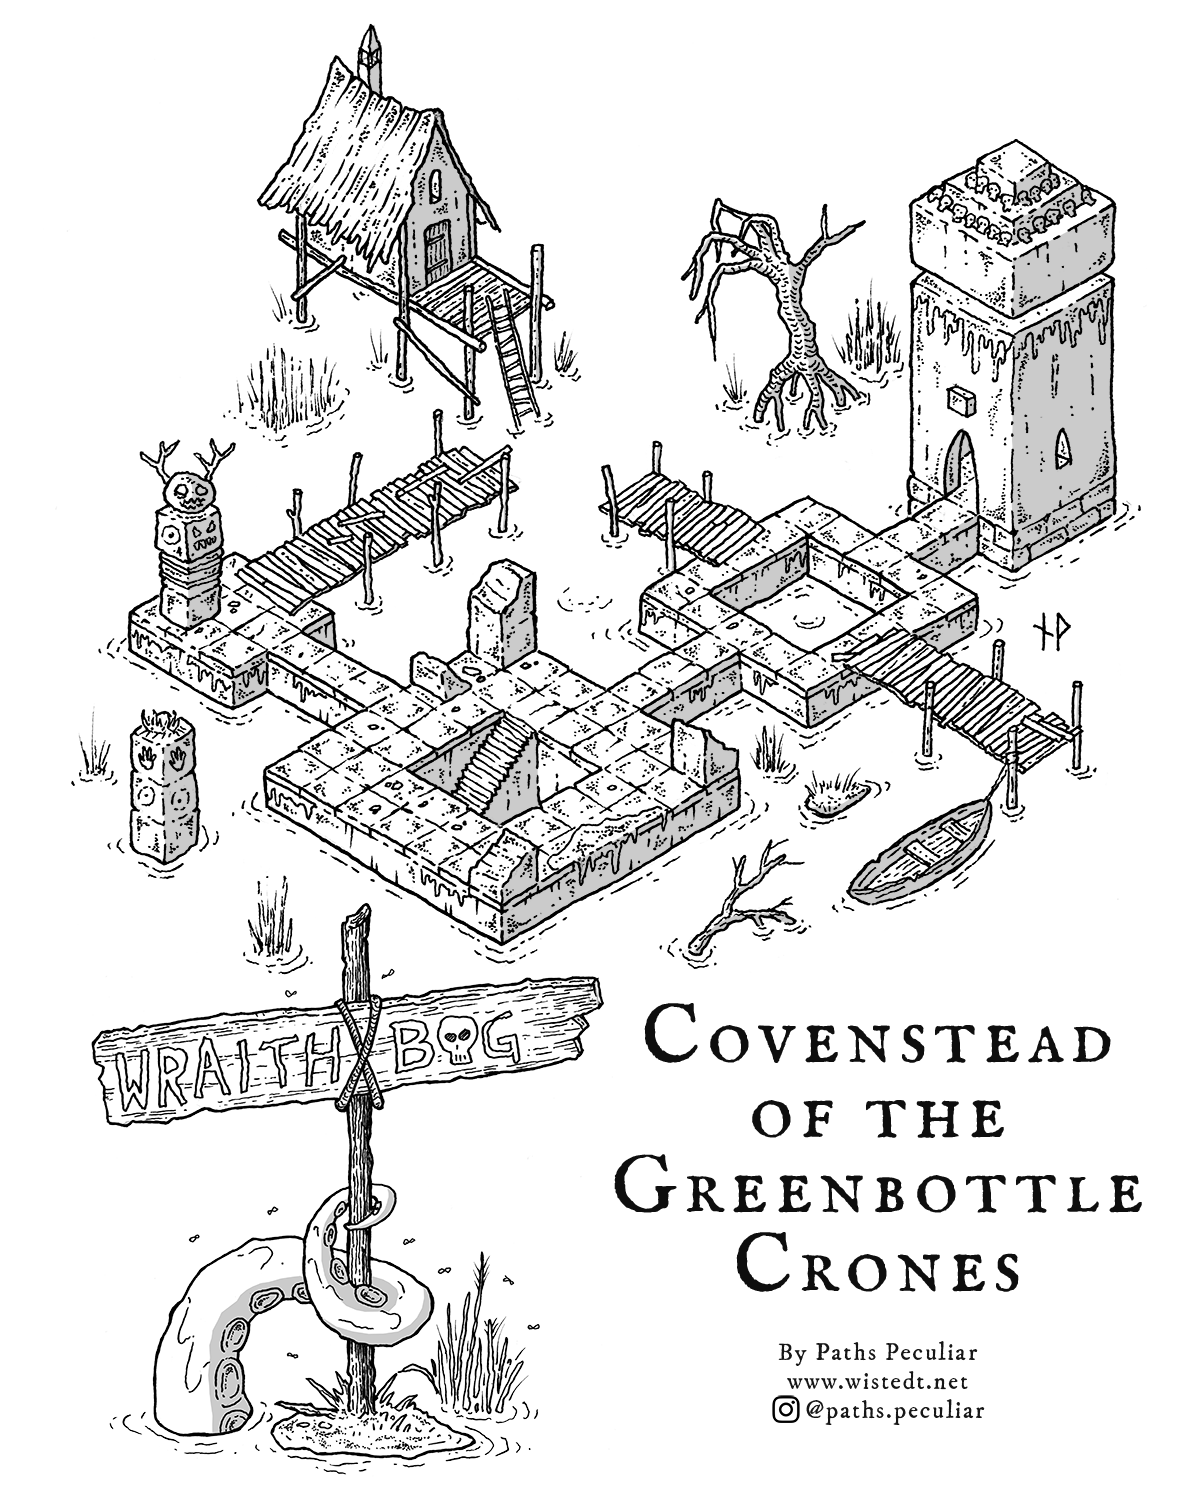 Convenstead of the Greenbottle Crones